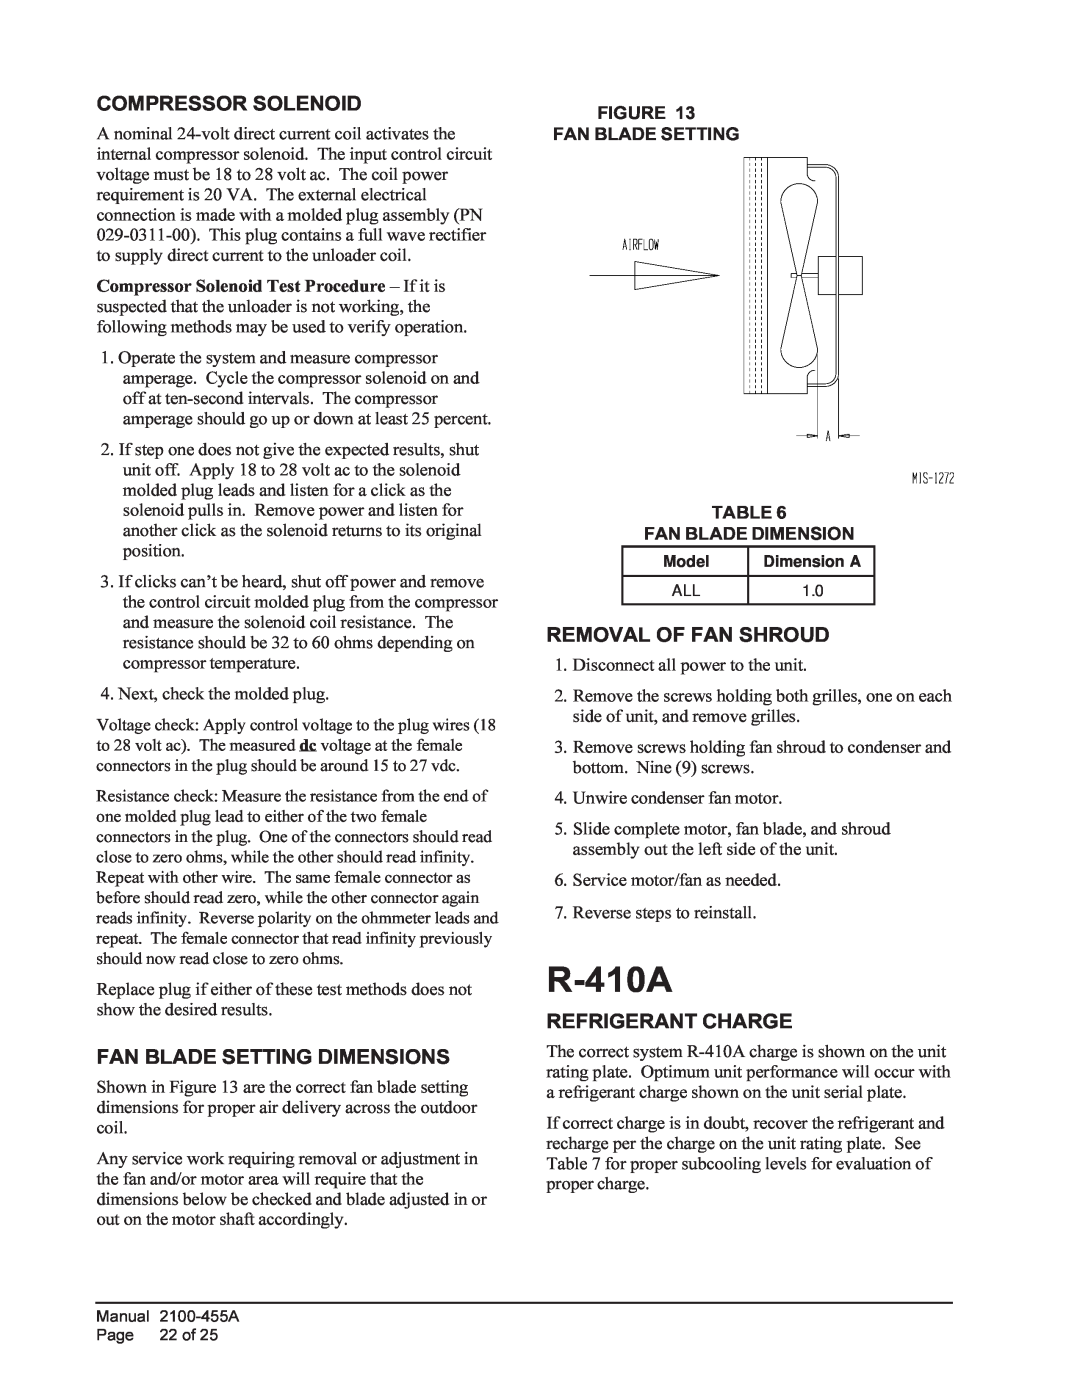 Bard CH5S1, CH4S1 R-410A, Compressor Solenoid, Fan Blade Setting Dimensions, Removal Of Fan Shroud, Refrigerant Charge 